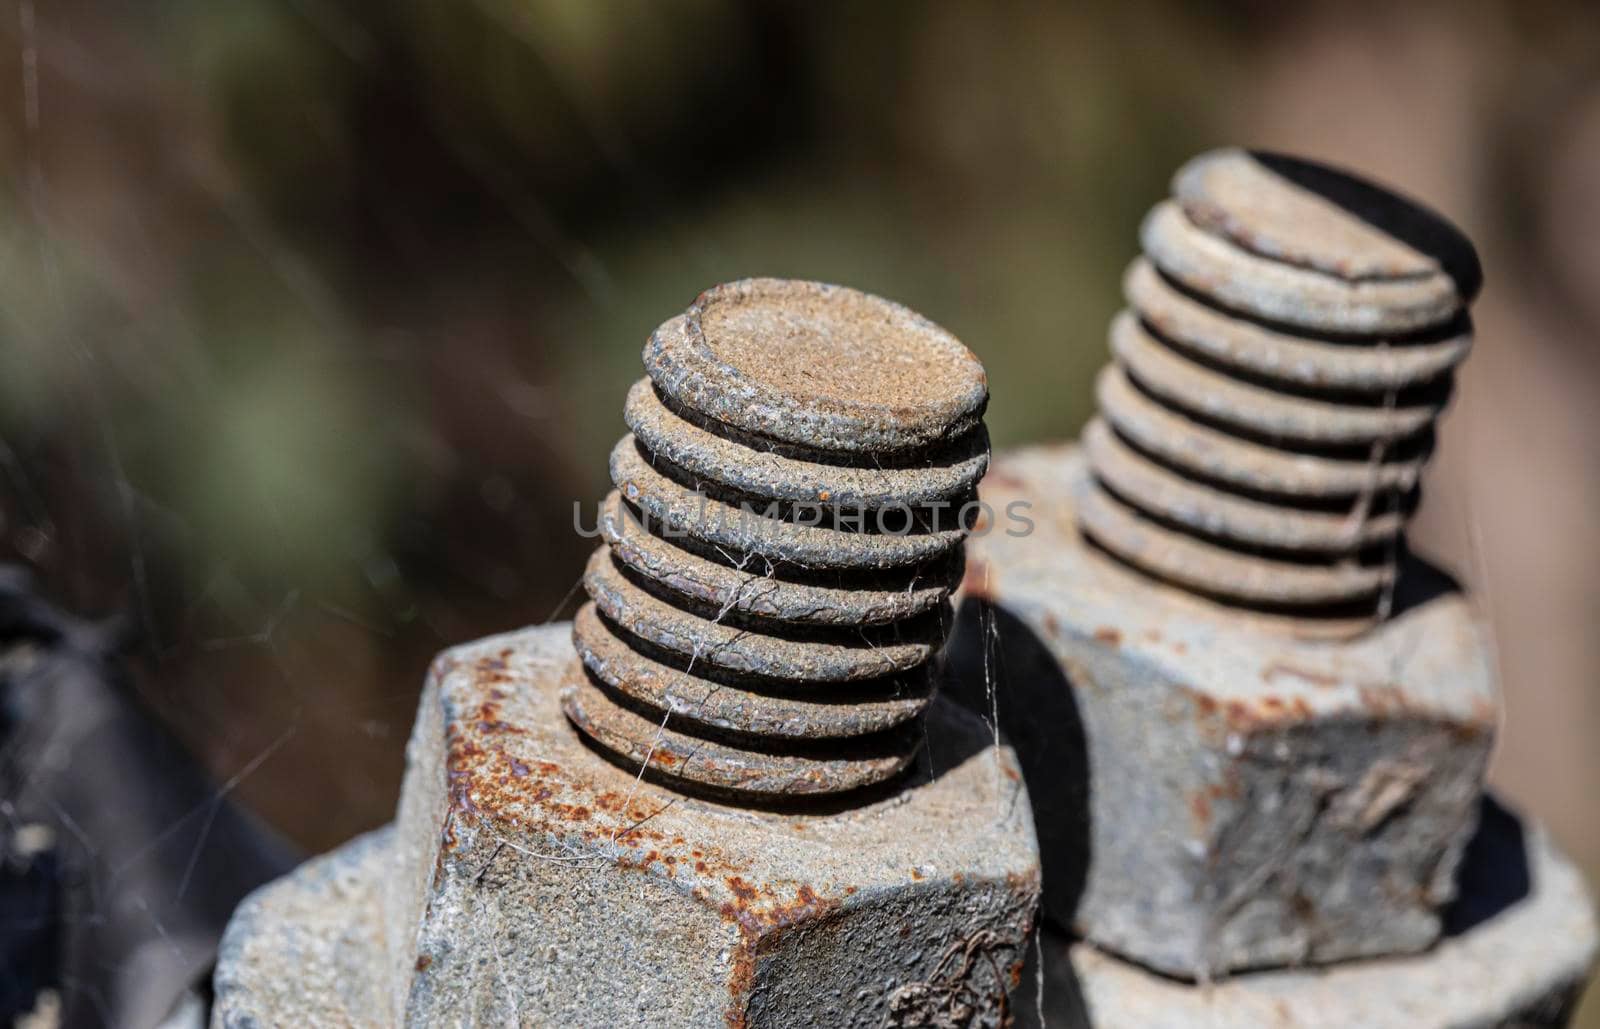 Photograph of the thread of a rusty galvanised bolt and nut securing a steel cable in a spiderweb